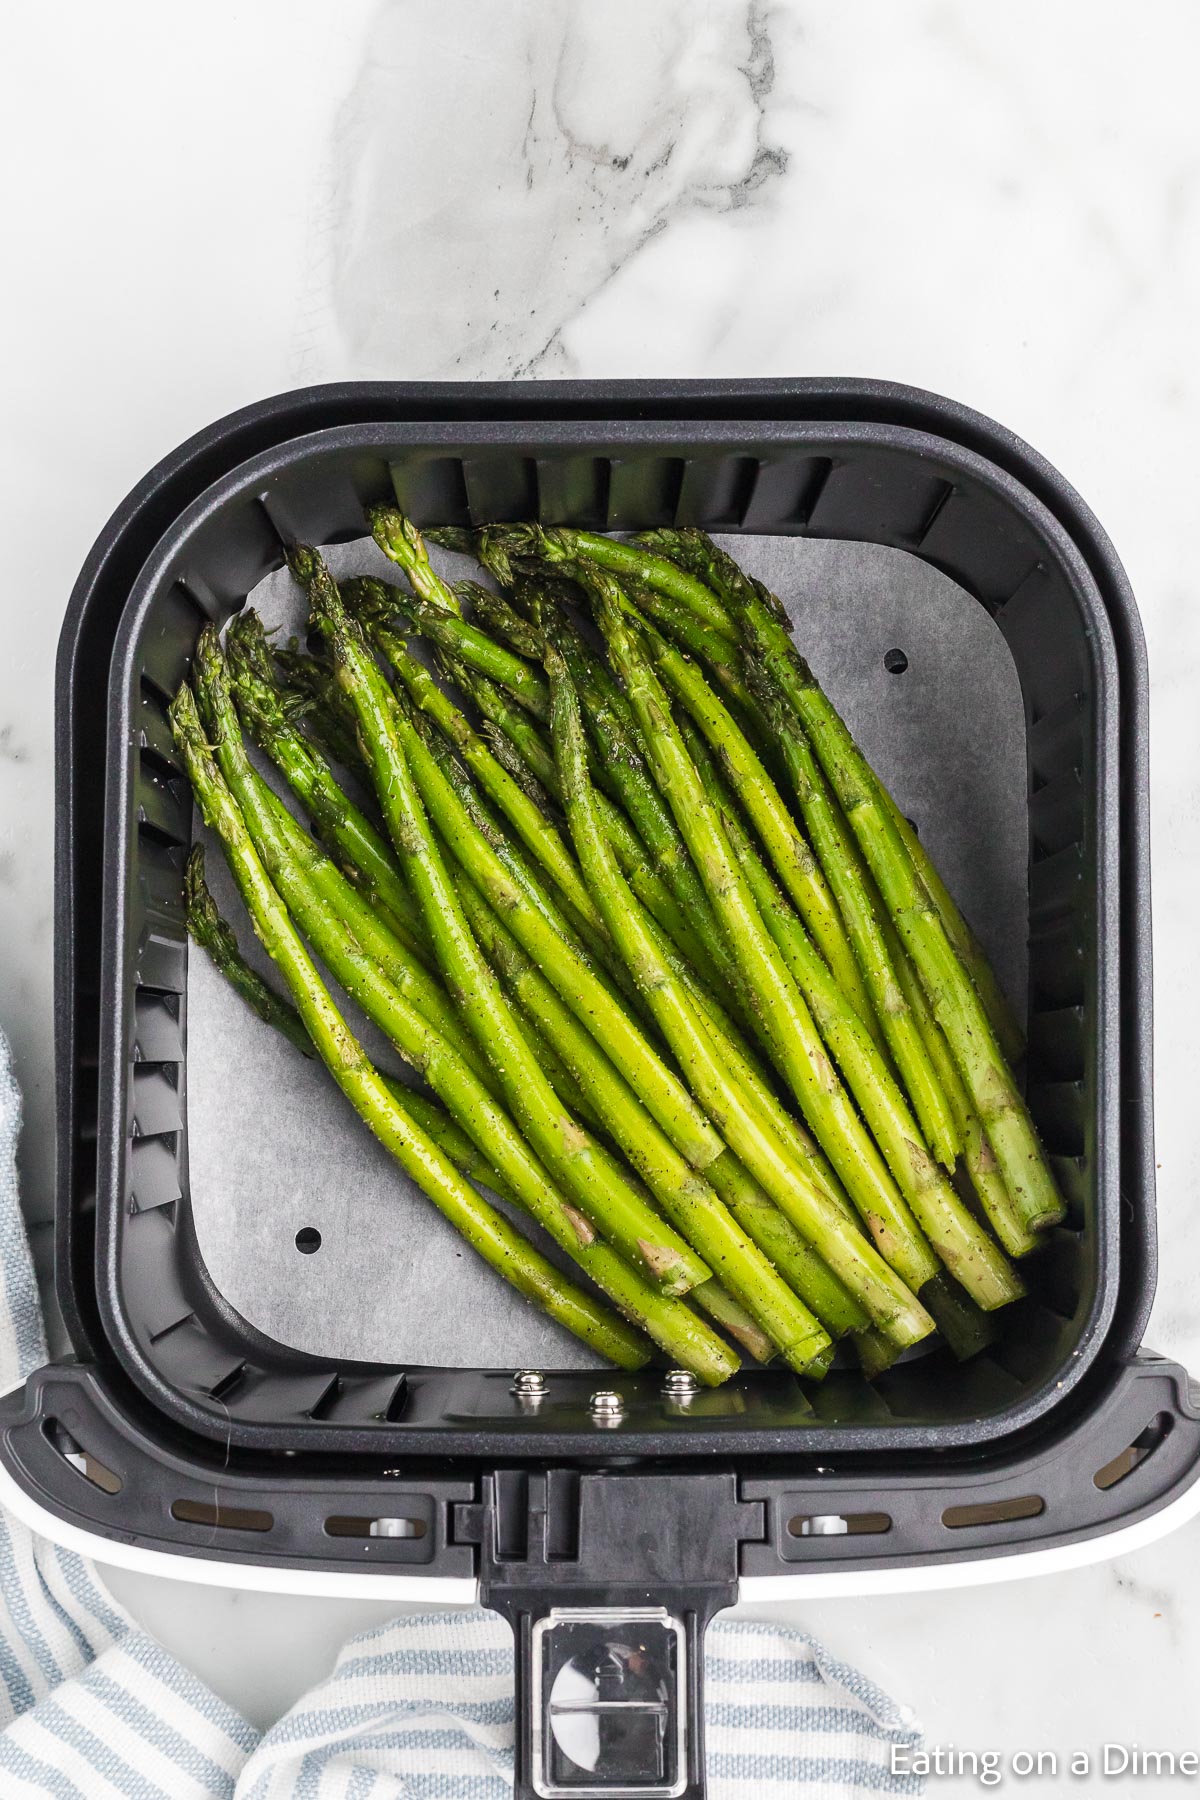 Placing the asparagus in a air fryer basket